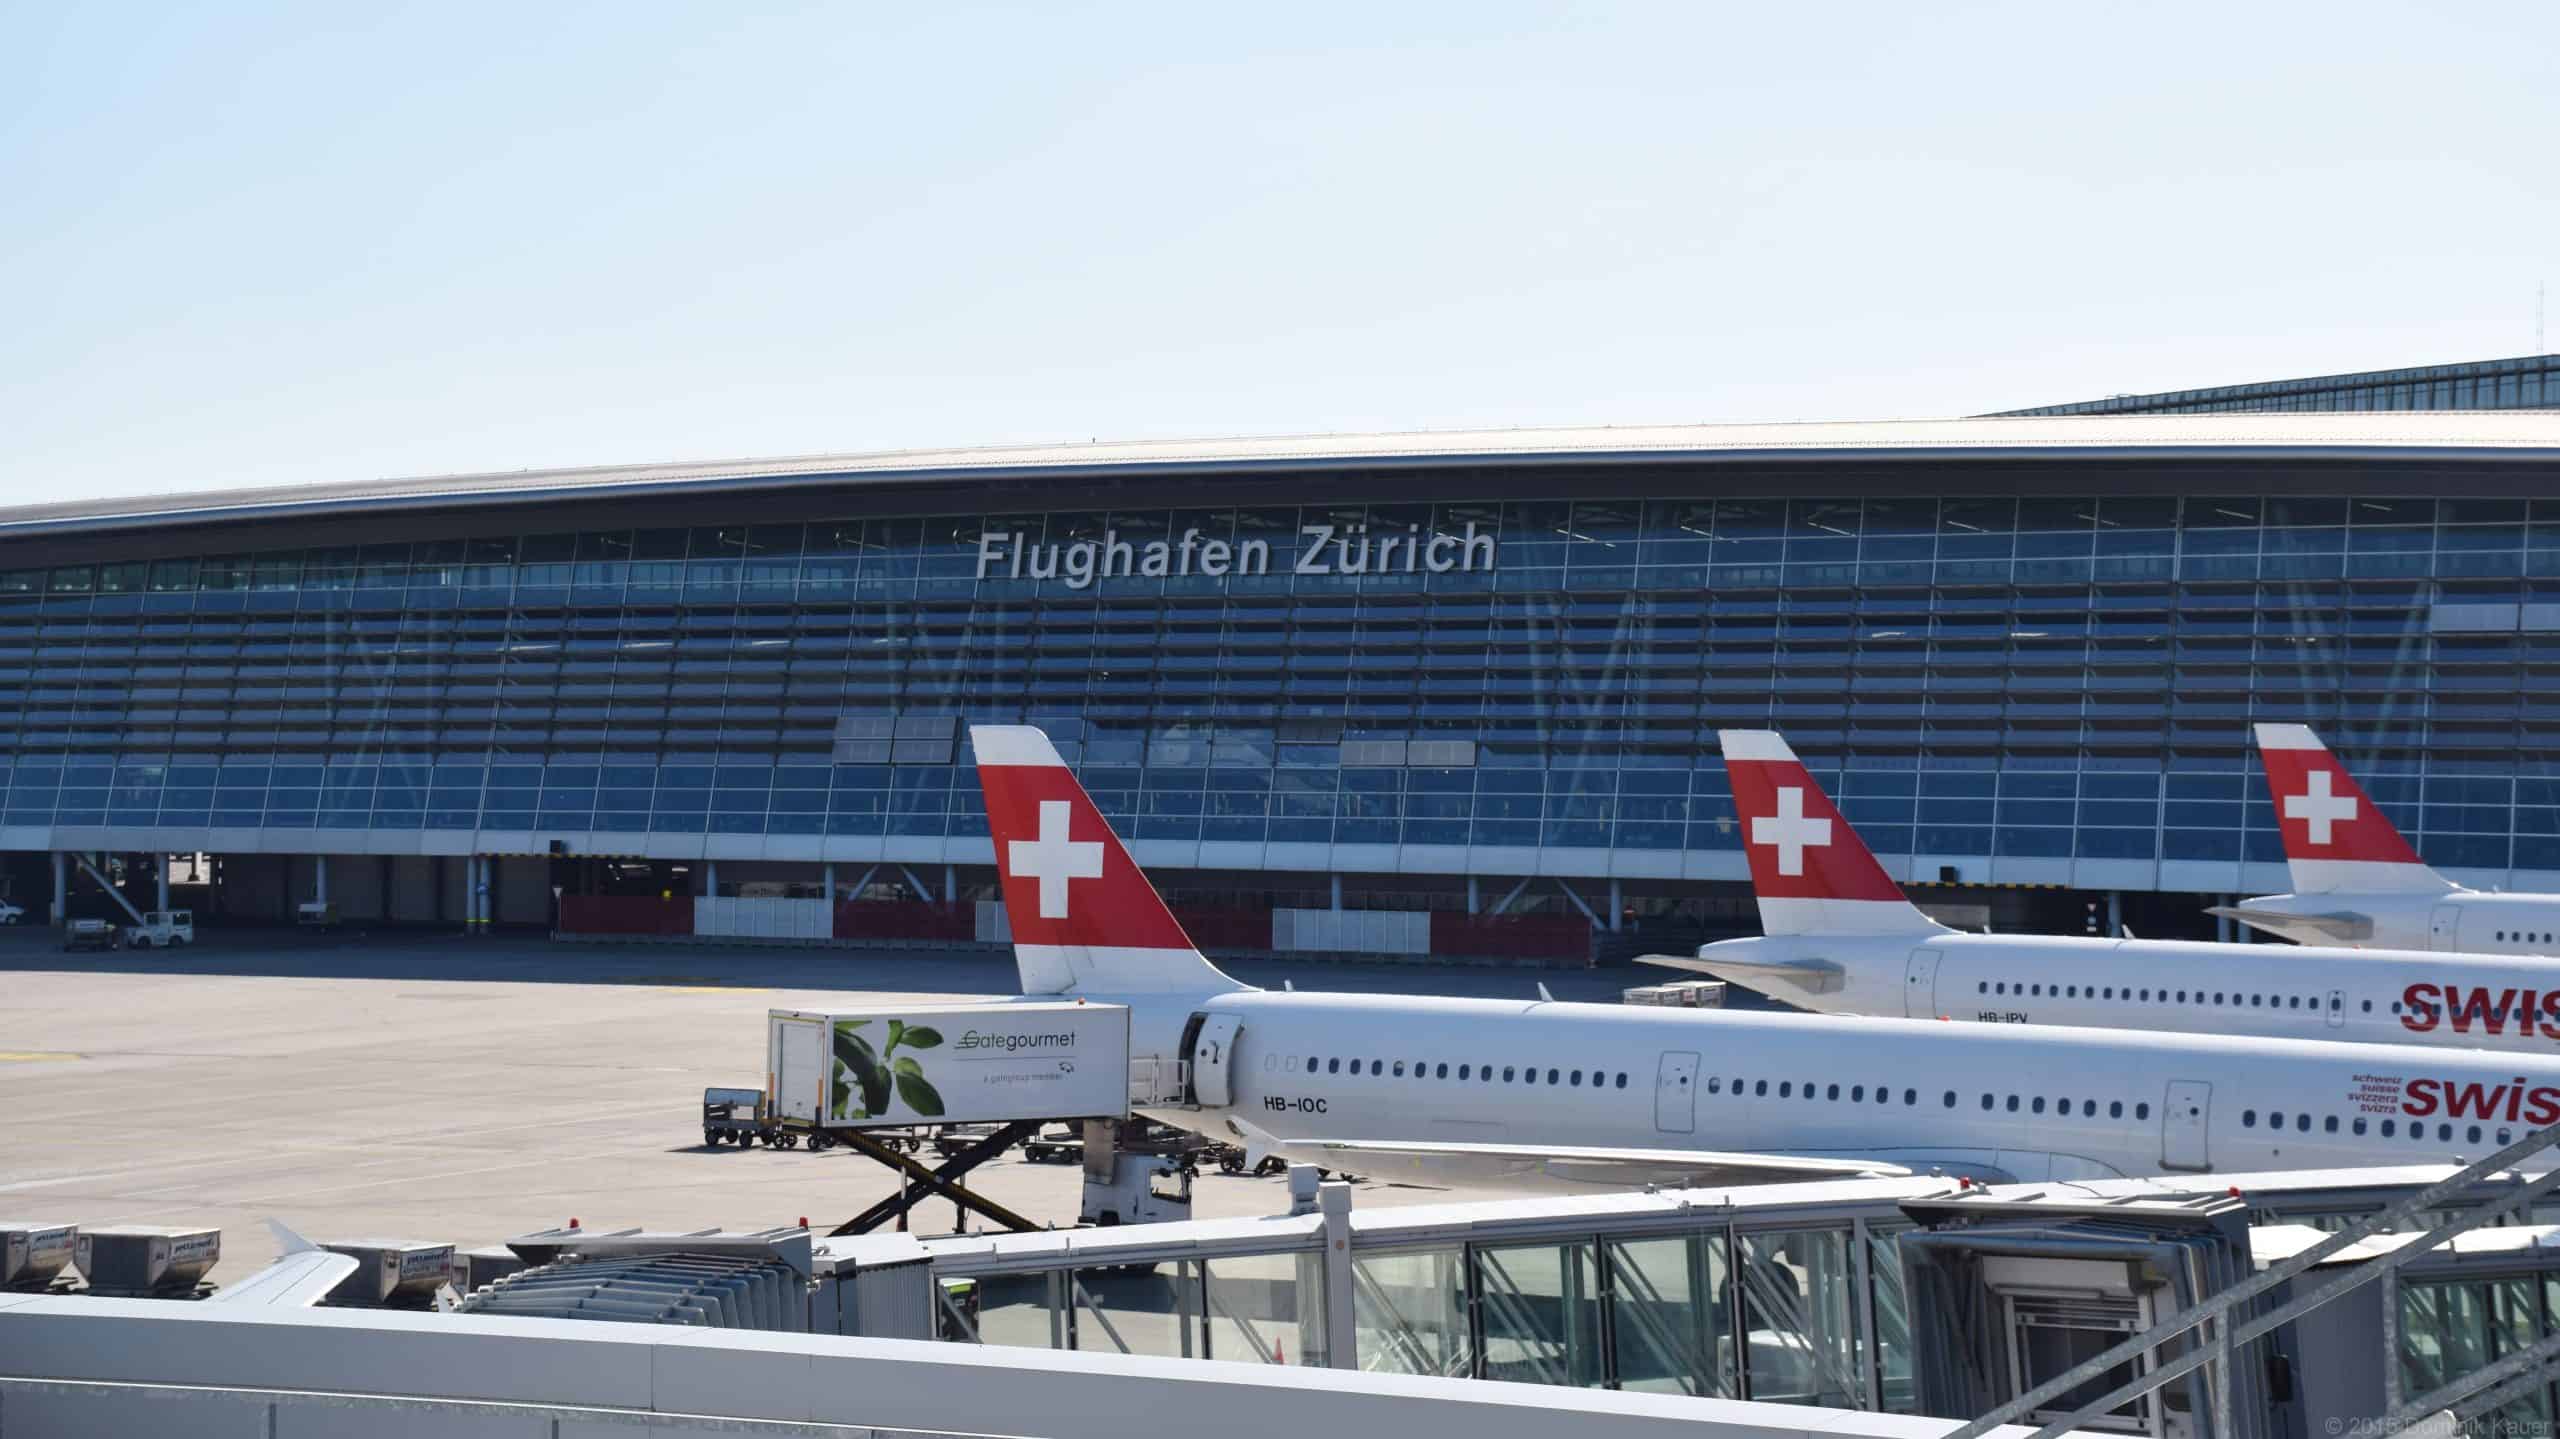 <p>The pinnacle of excellence for performance is Zurich Airport, which is renowned for its precision and timeliness.</p><p>Remember to scroll up and hit the ‘Follow’ button to keep up with the newest stories from Seattle Travel on your Microsoft Start feed or MSN homepage!</p>